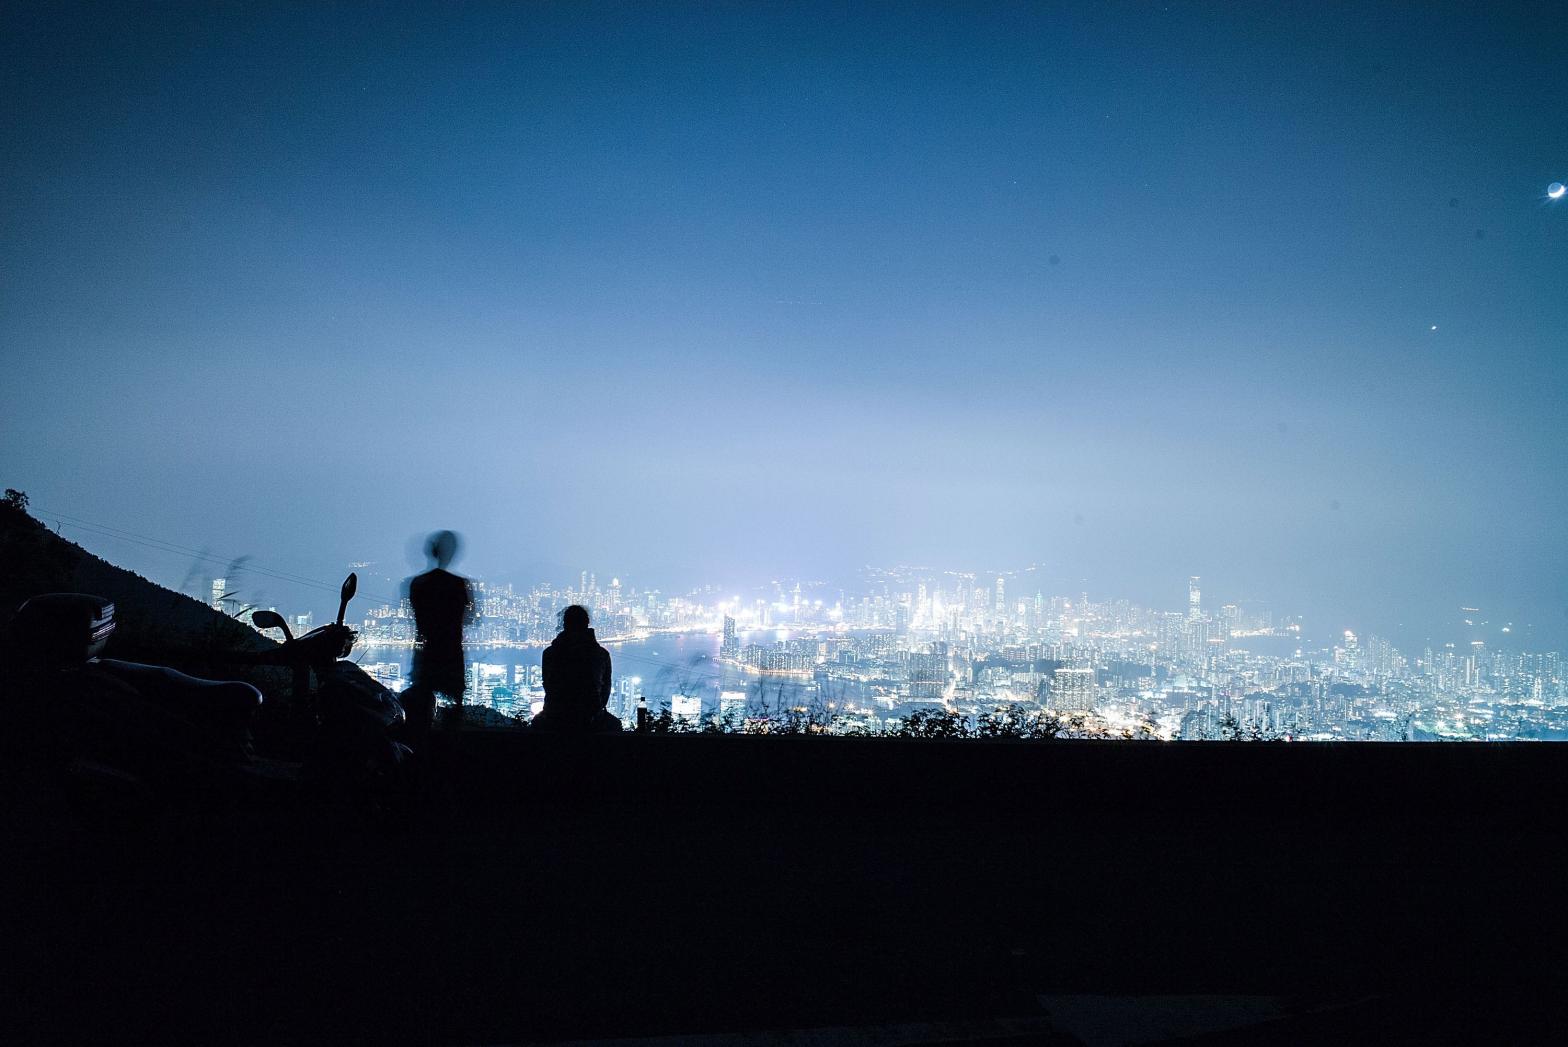 Hong Kong at night. Not ideal for stargazing. (Photo: Lam Yik Fei, Getty Images)